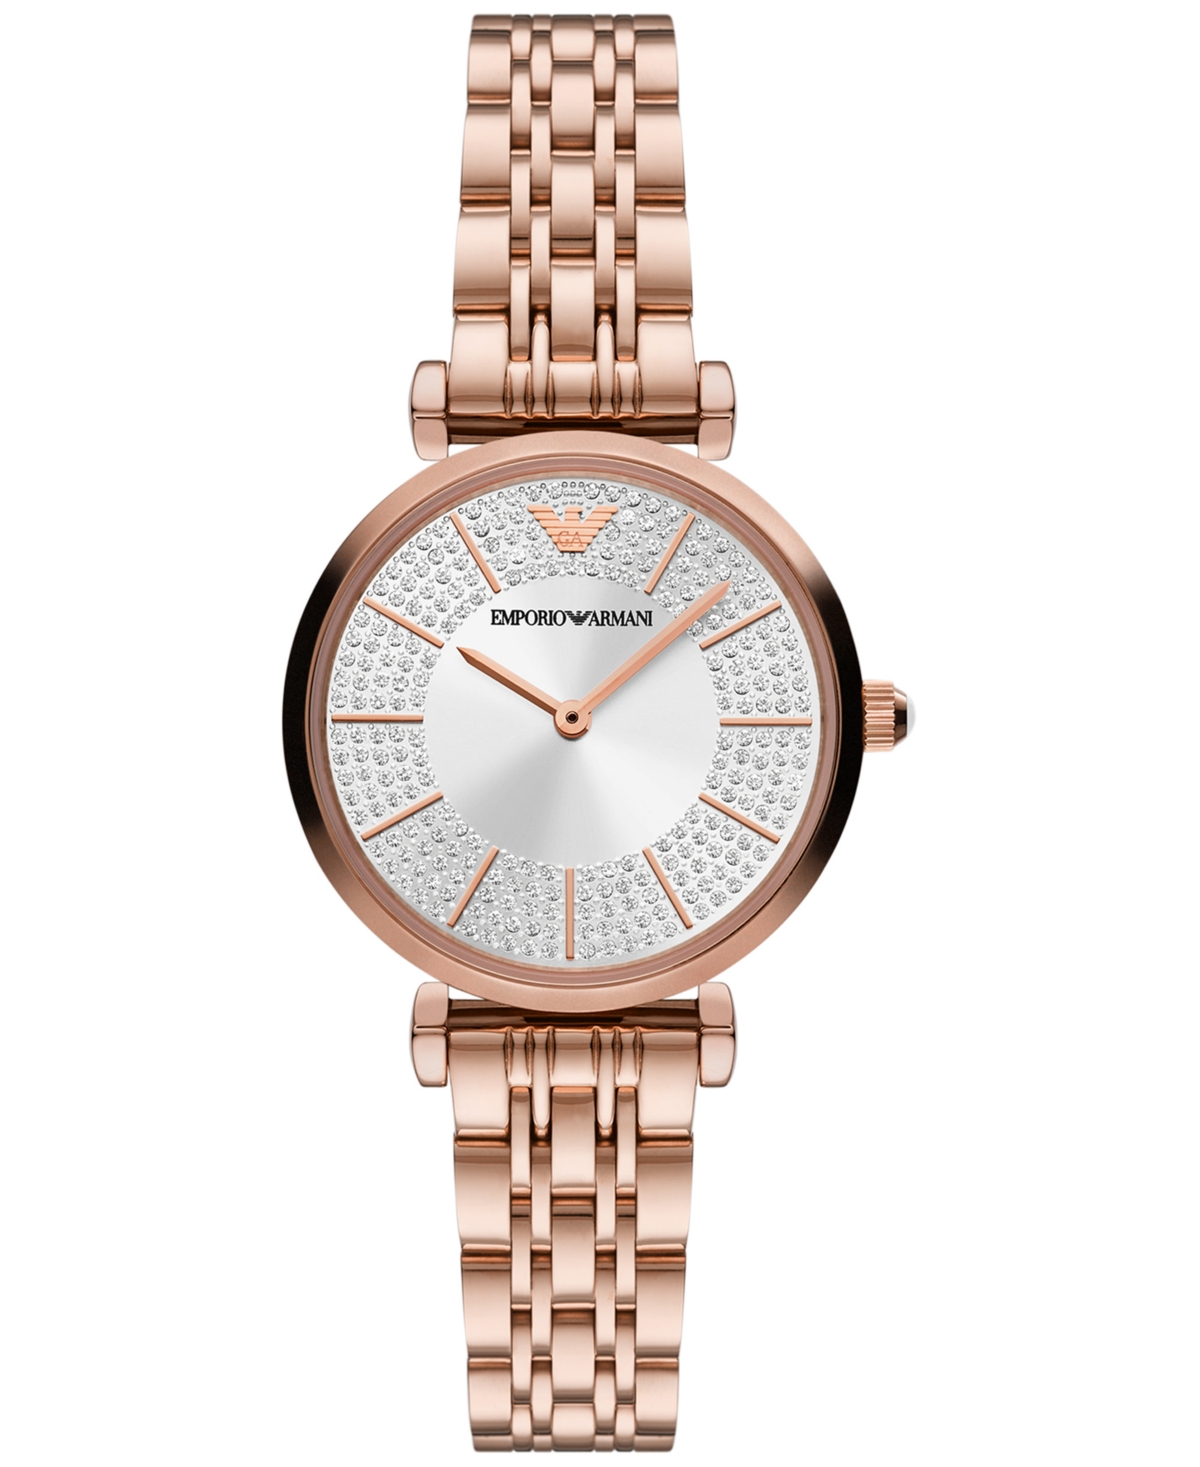 Emporio Armani Women's Rose Gold-tone Stainless Steel Bracelet Watch 32mm